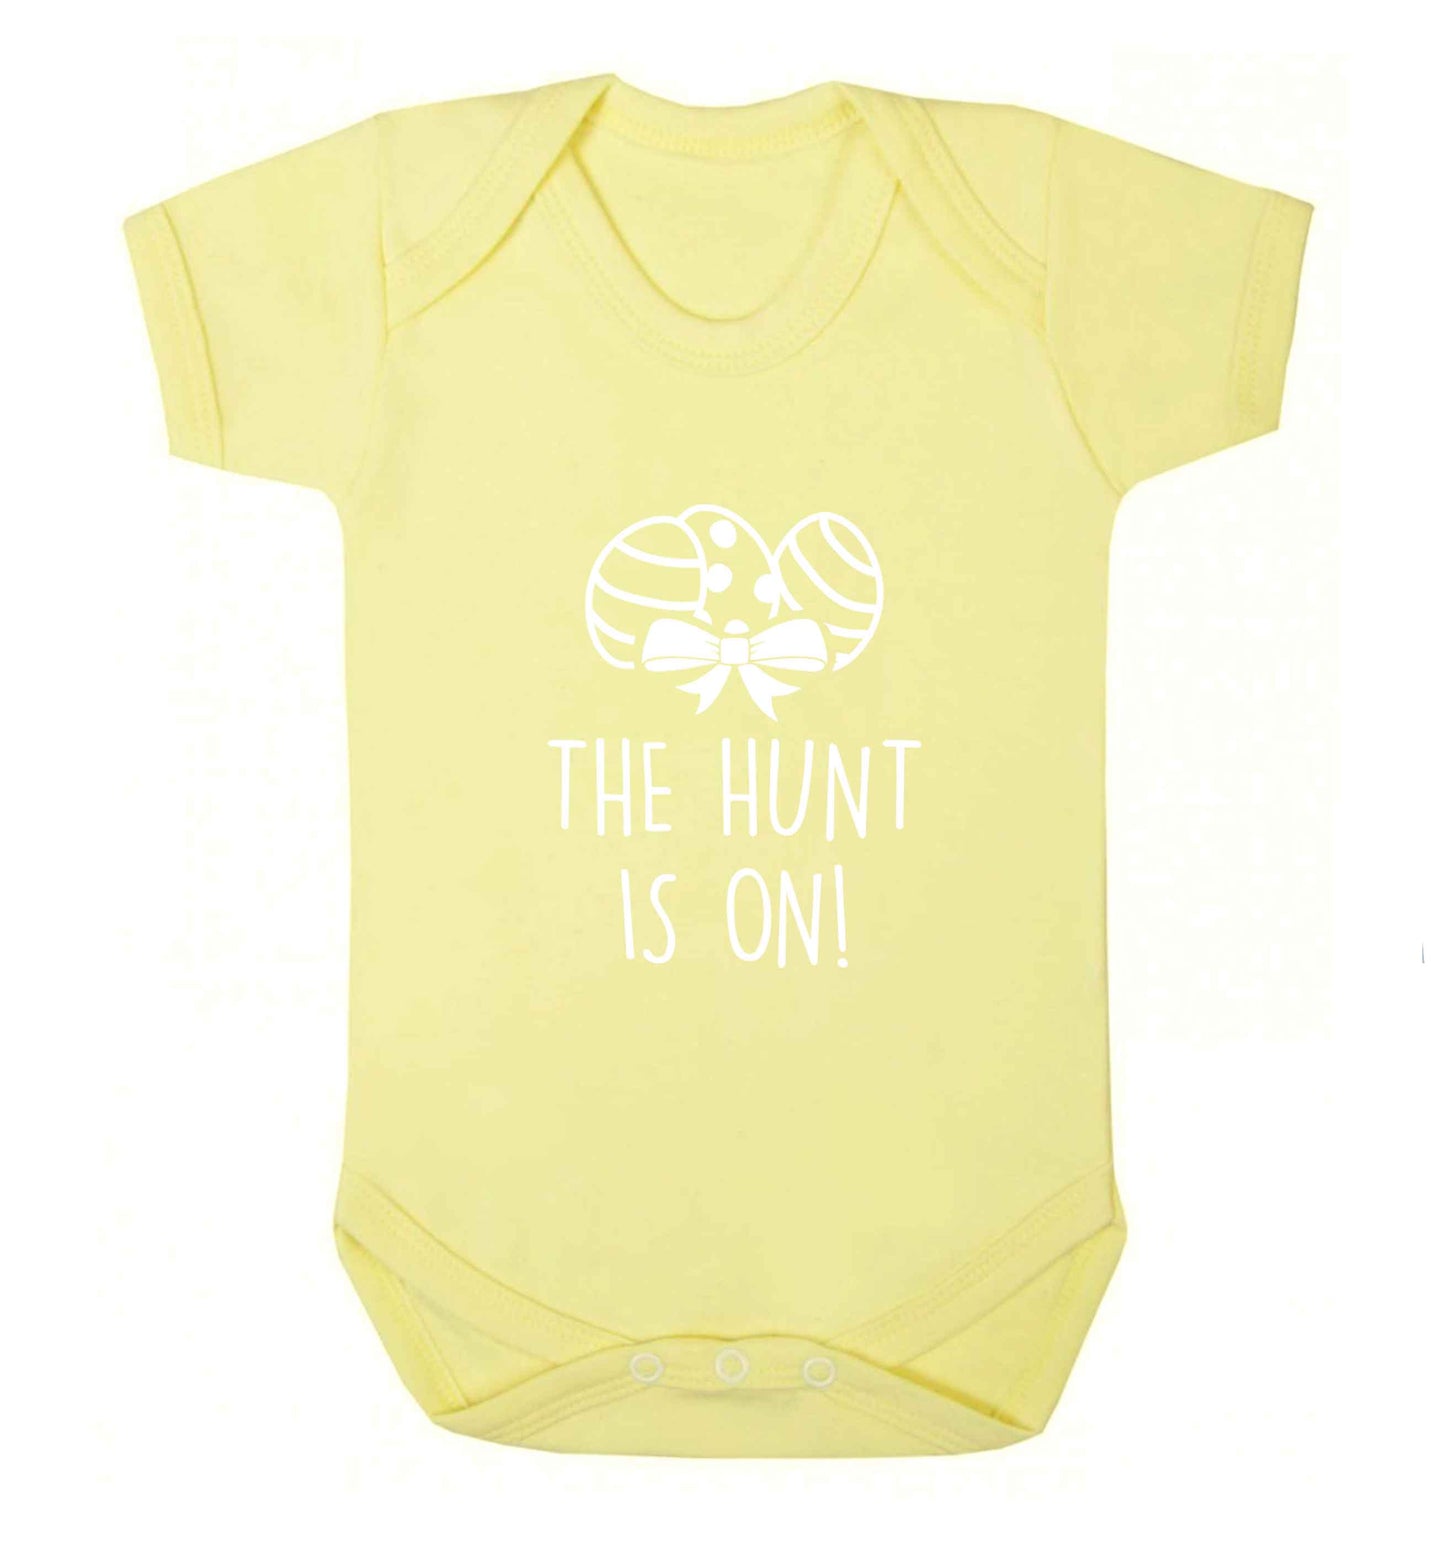 The hunt is on baby vest pale yellow 18-24 months